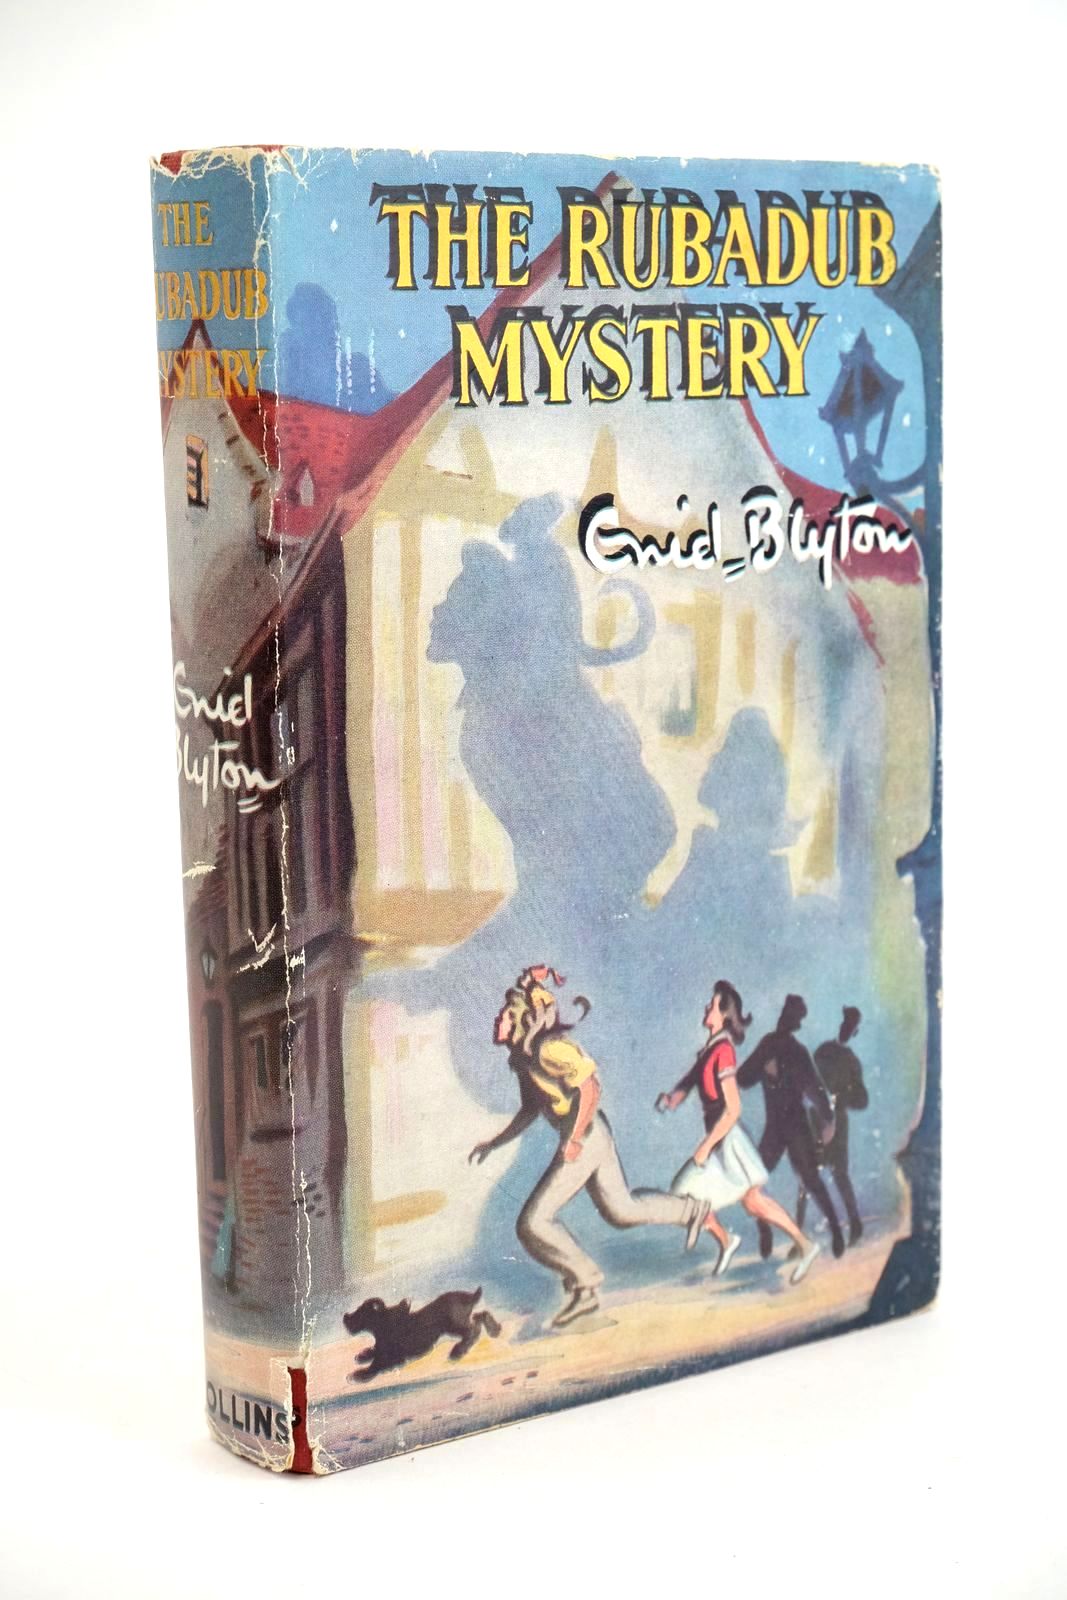 Photo of THE RUBADUB MYSTERY written by Blyton, Enid illustrated by Dunlop, Gilbert published by Collins (STOCK CODE: 1323587)  for sale by Stella & Rose's Books